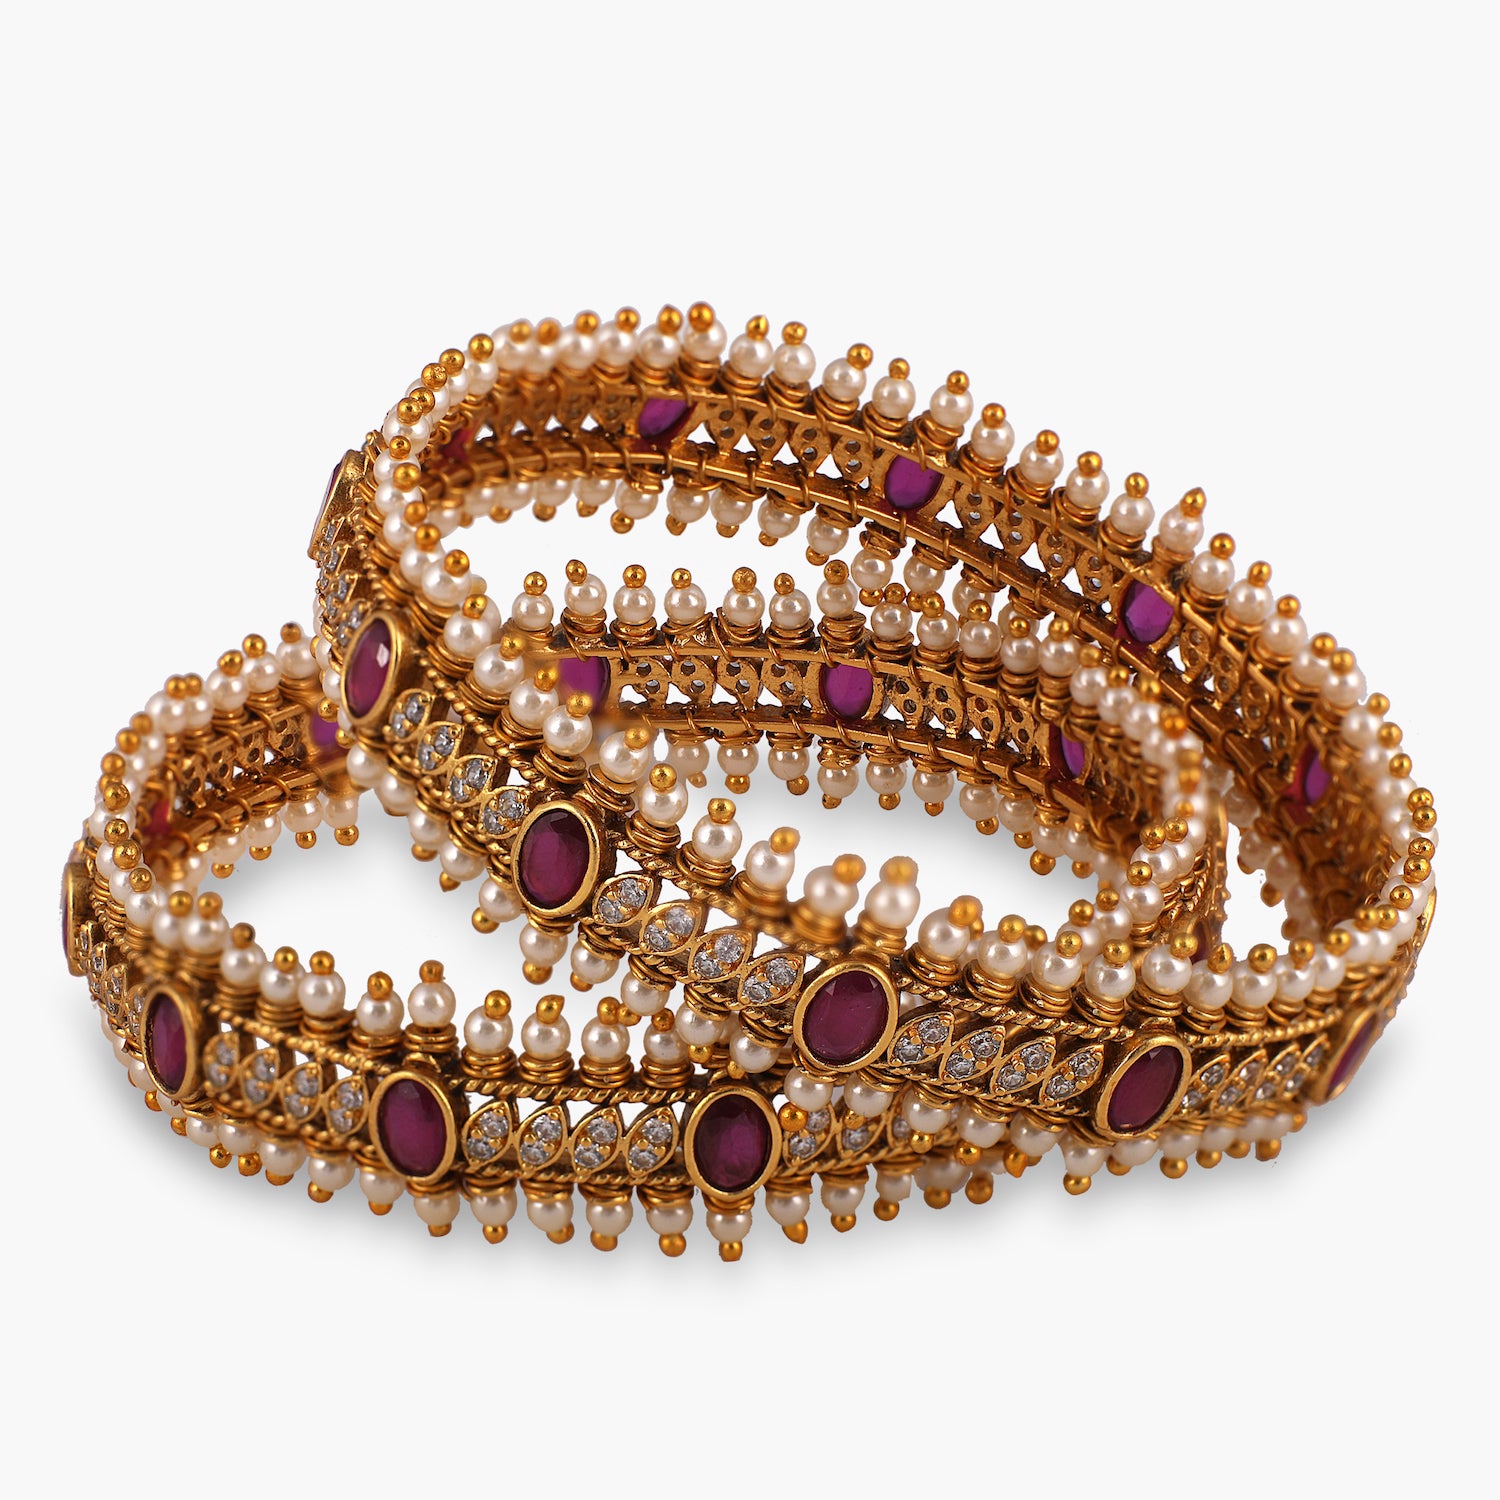 Daily Wear Gold Bangles For Women